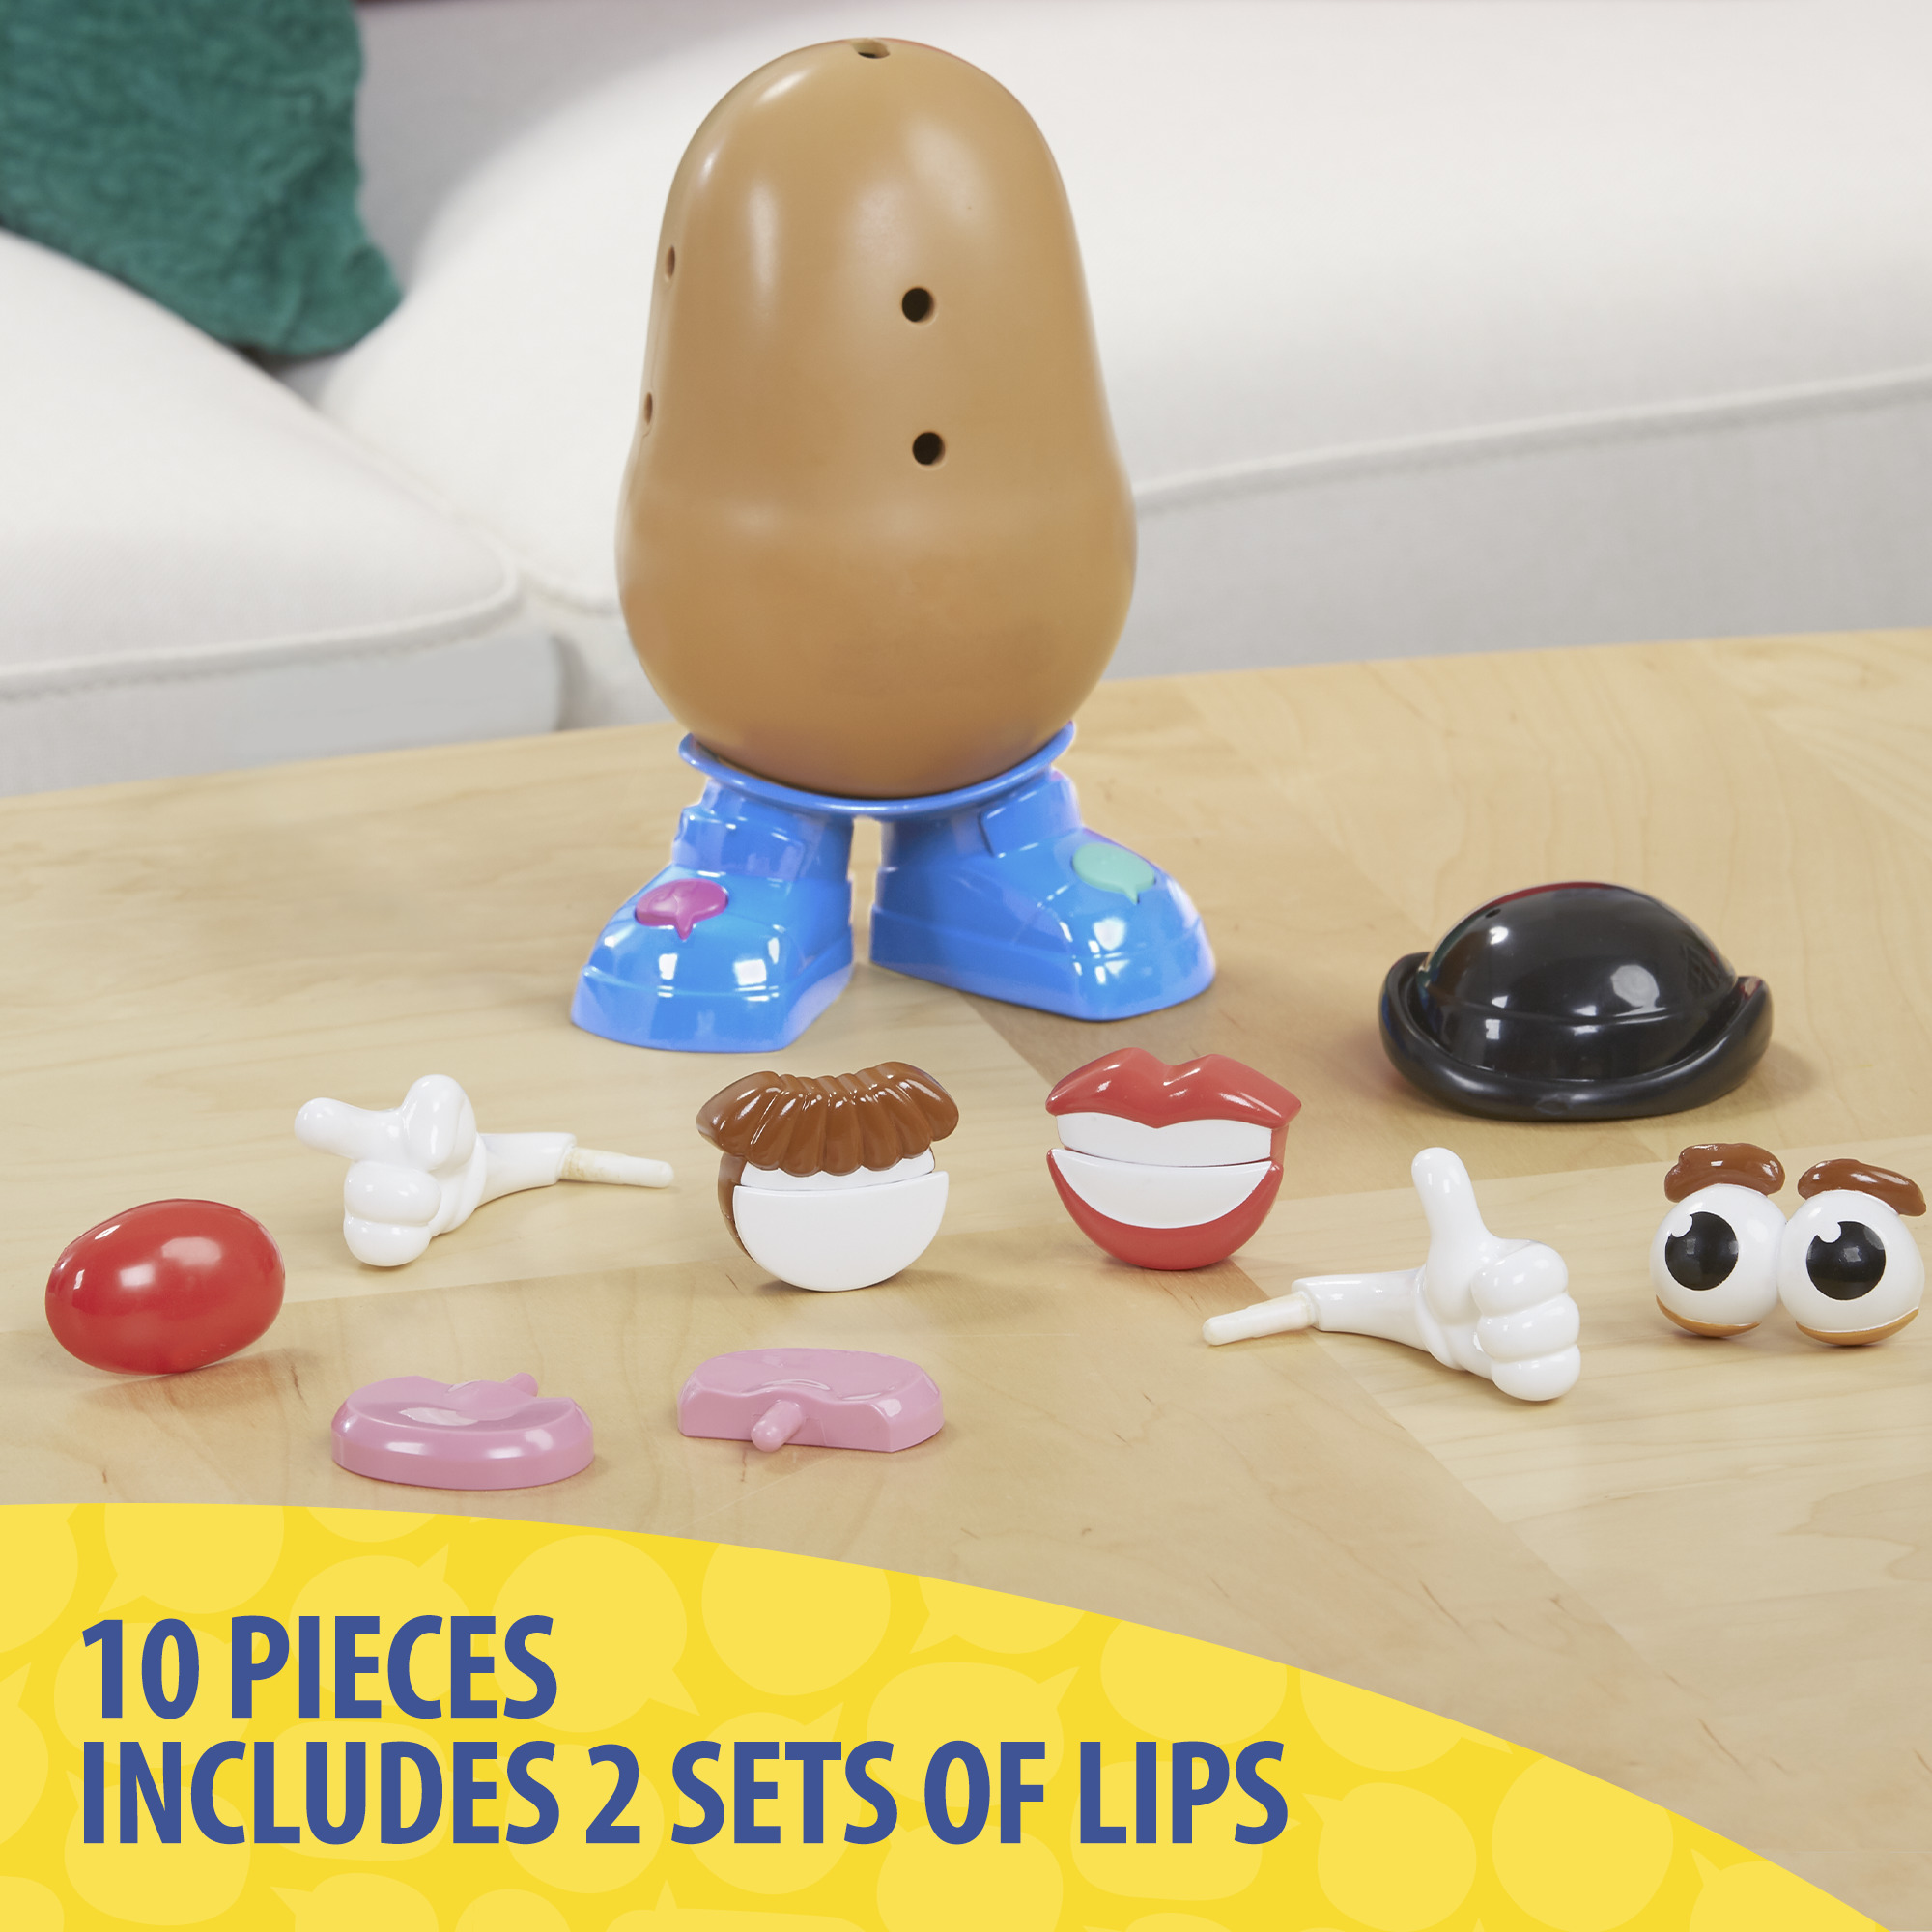 Mr. Potato Head Movin' Lips Electronic Interactive Talking Toy - image 4 of 14